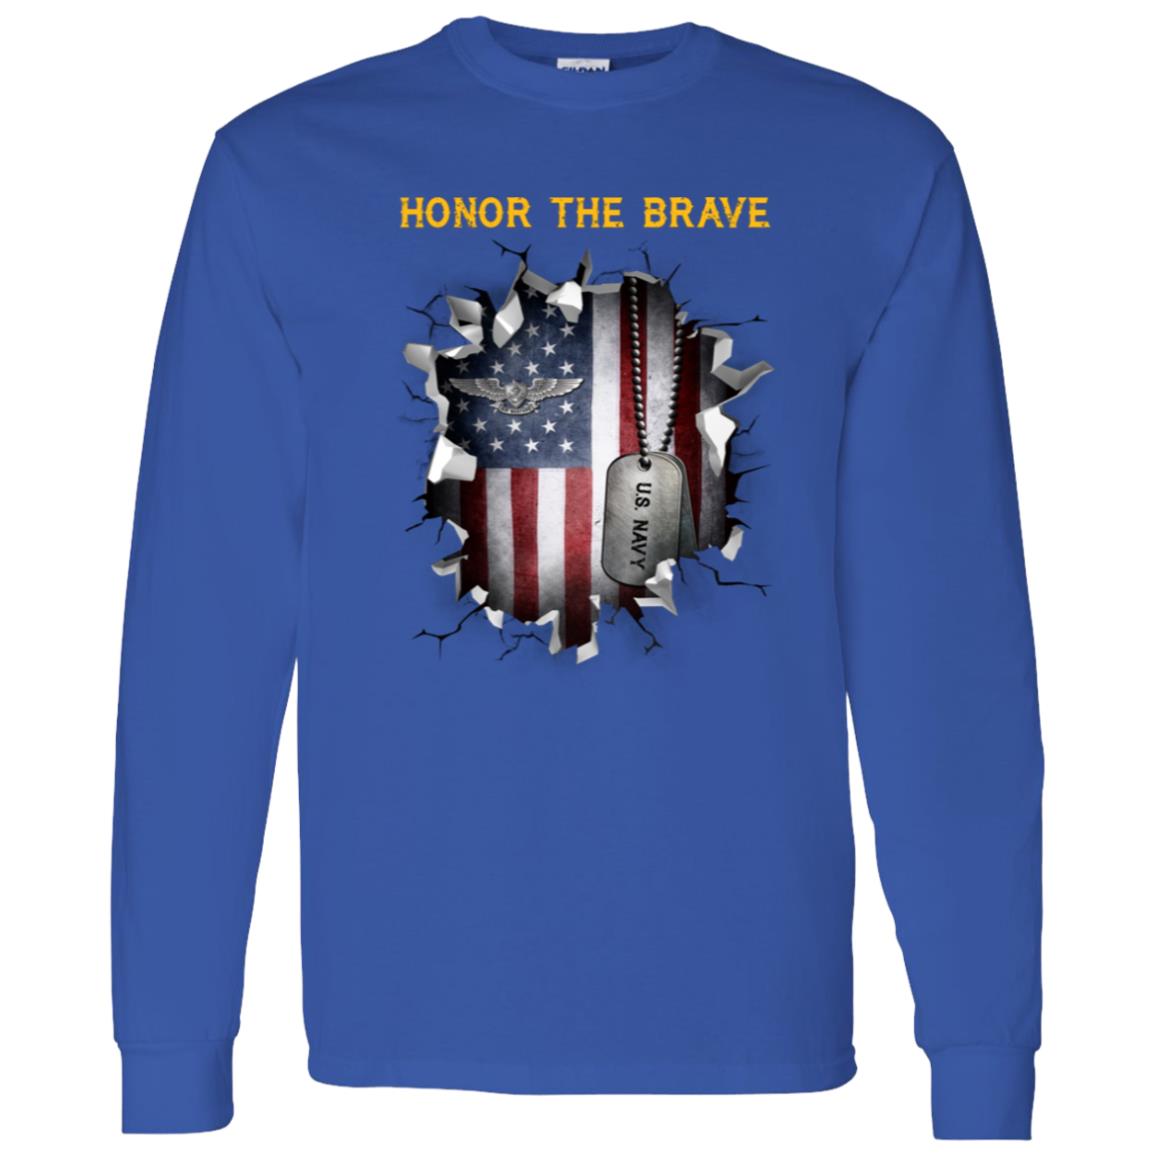 U.S. Navy Enlisted Aviation Warfare Specialist - Honor The Brave Front Shirt